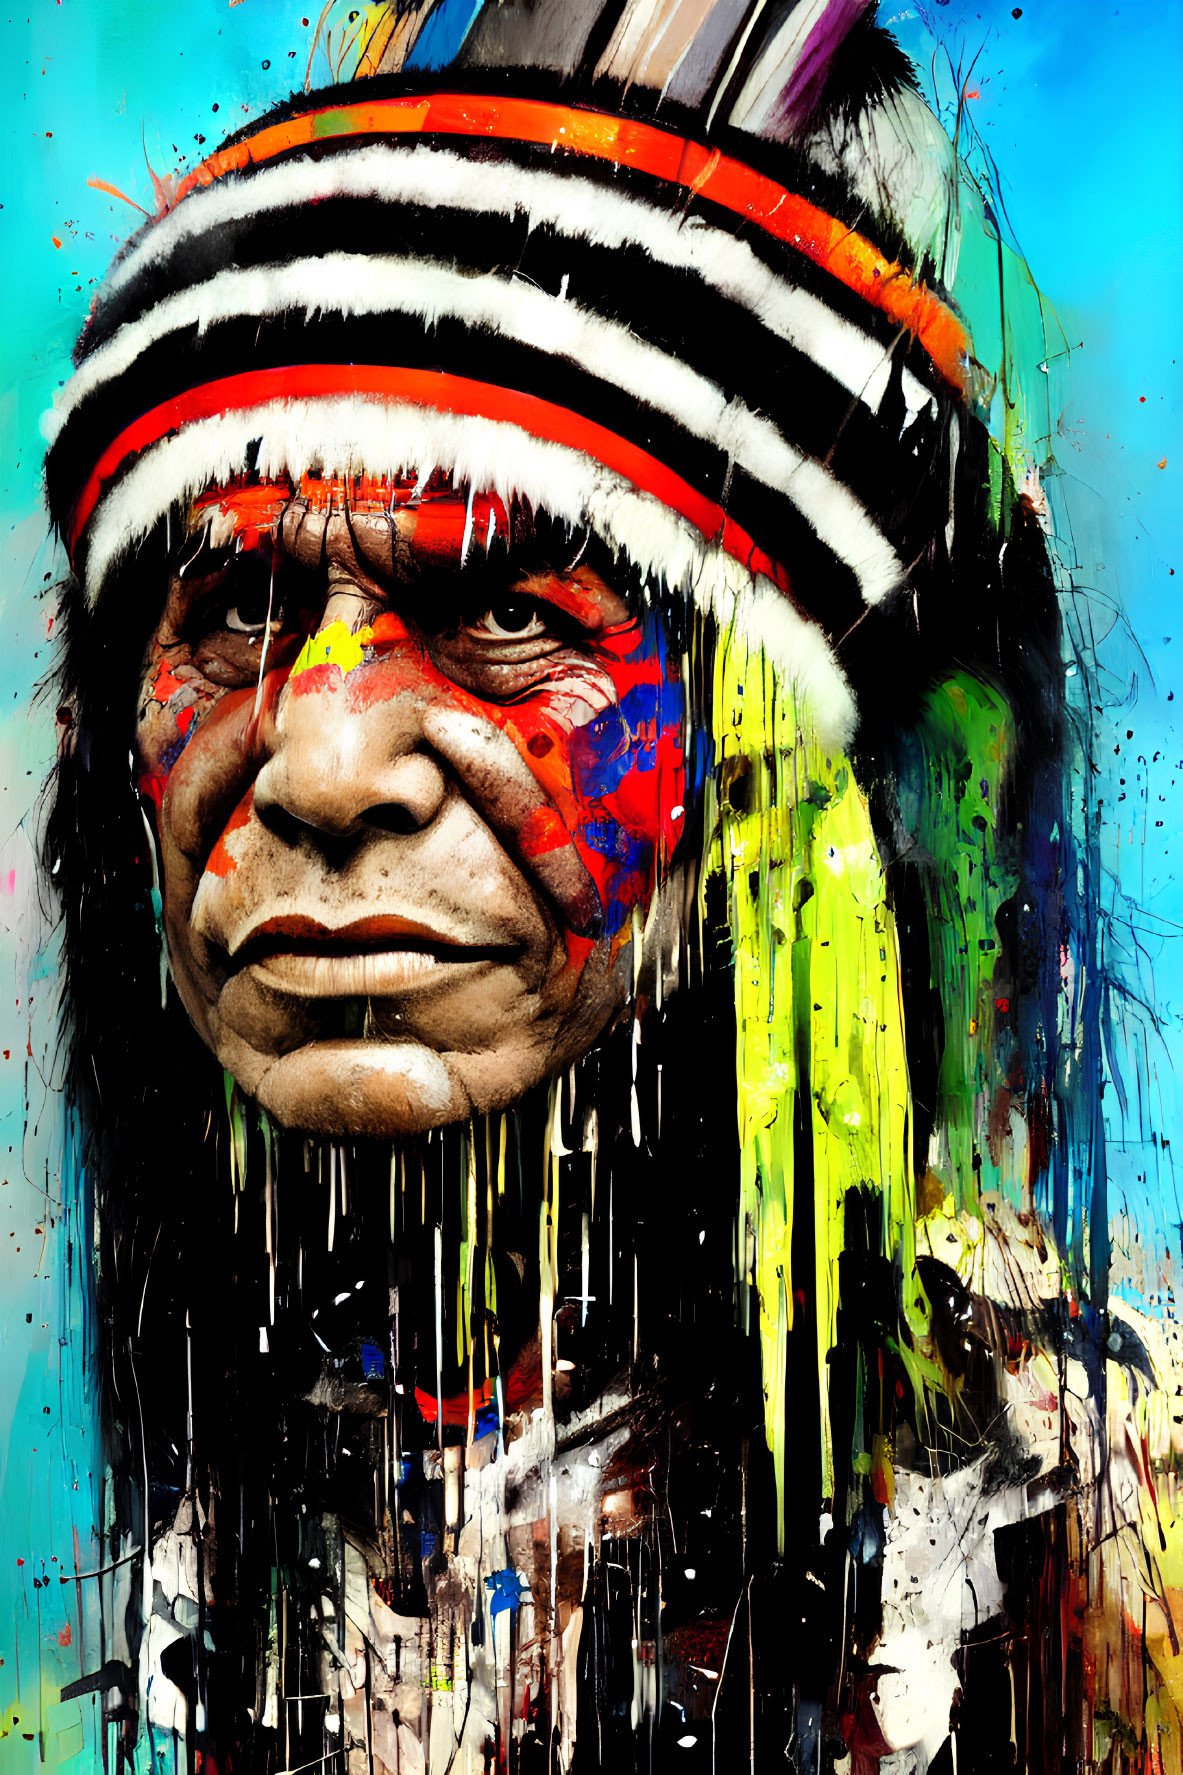 Colorful portrait with indigenous attire and face paint, expressive eyes, and dripping paint overlay.